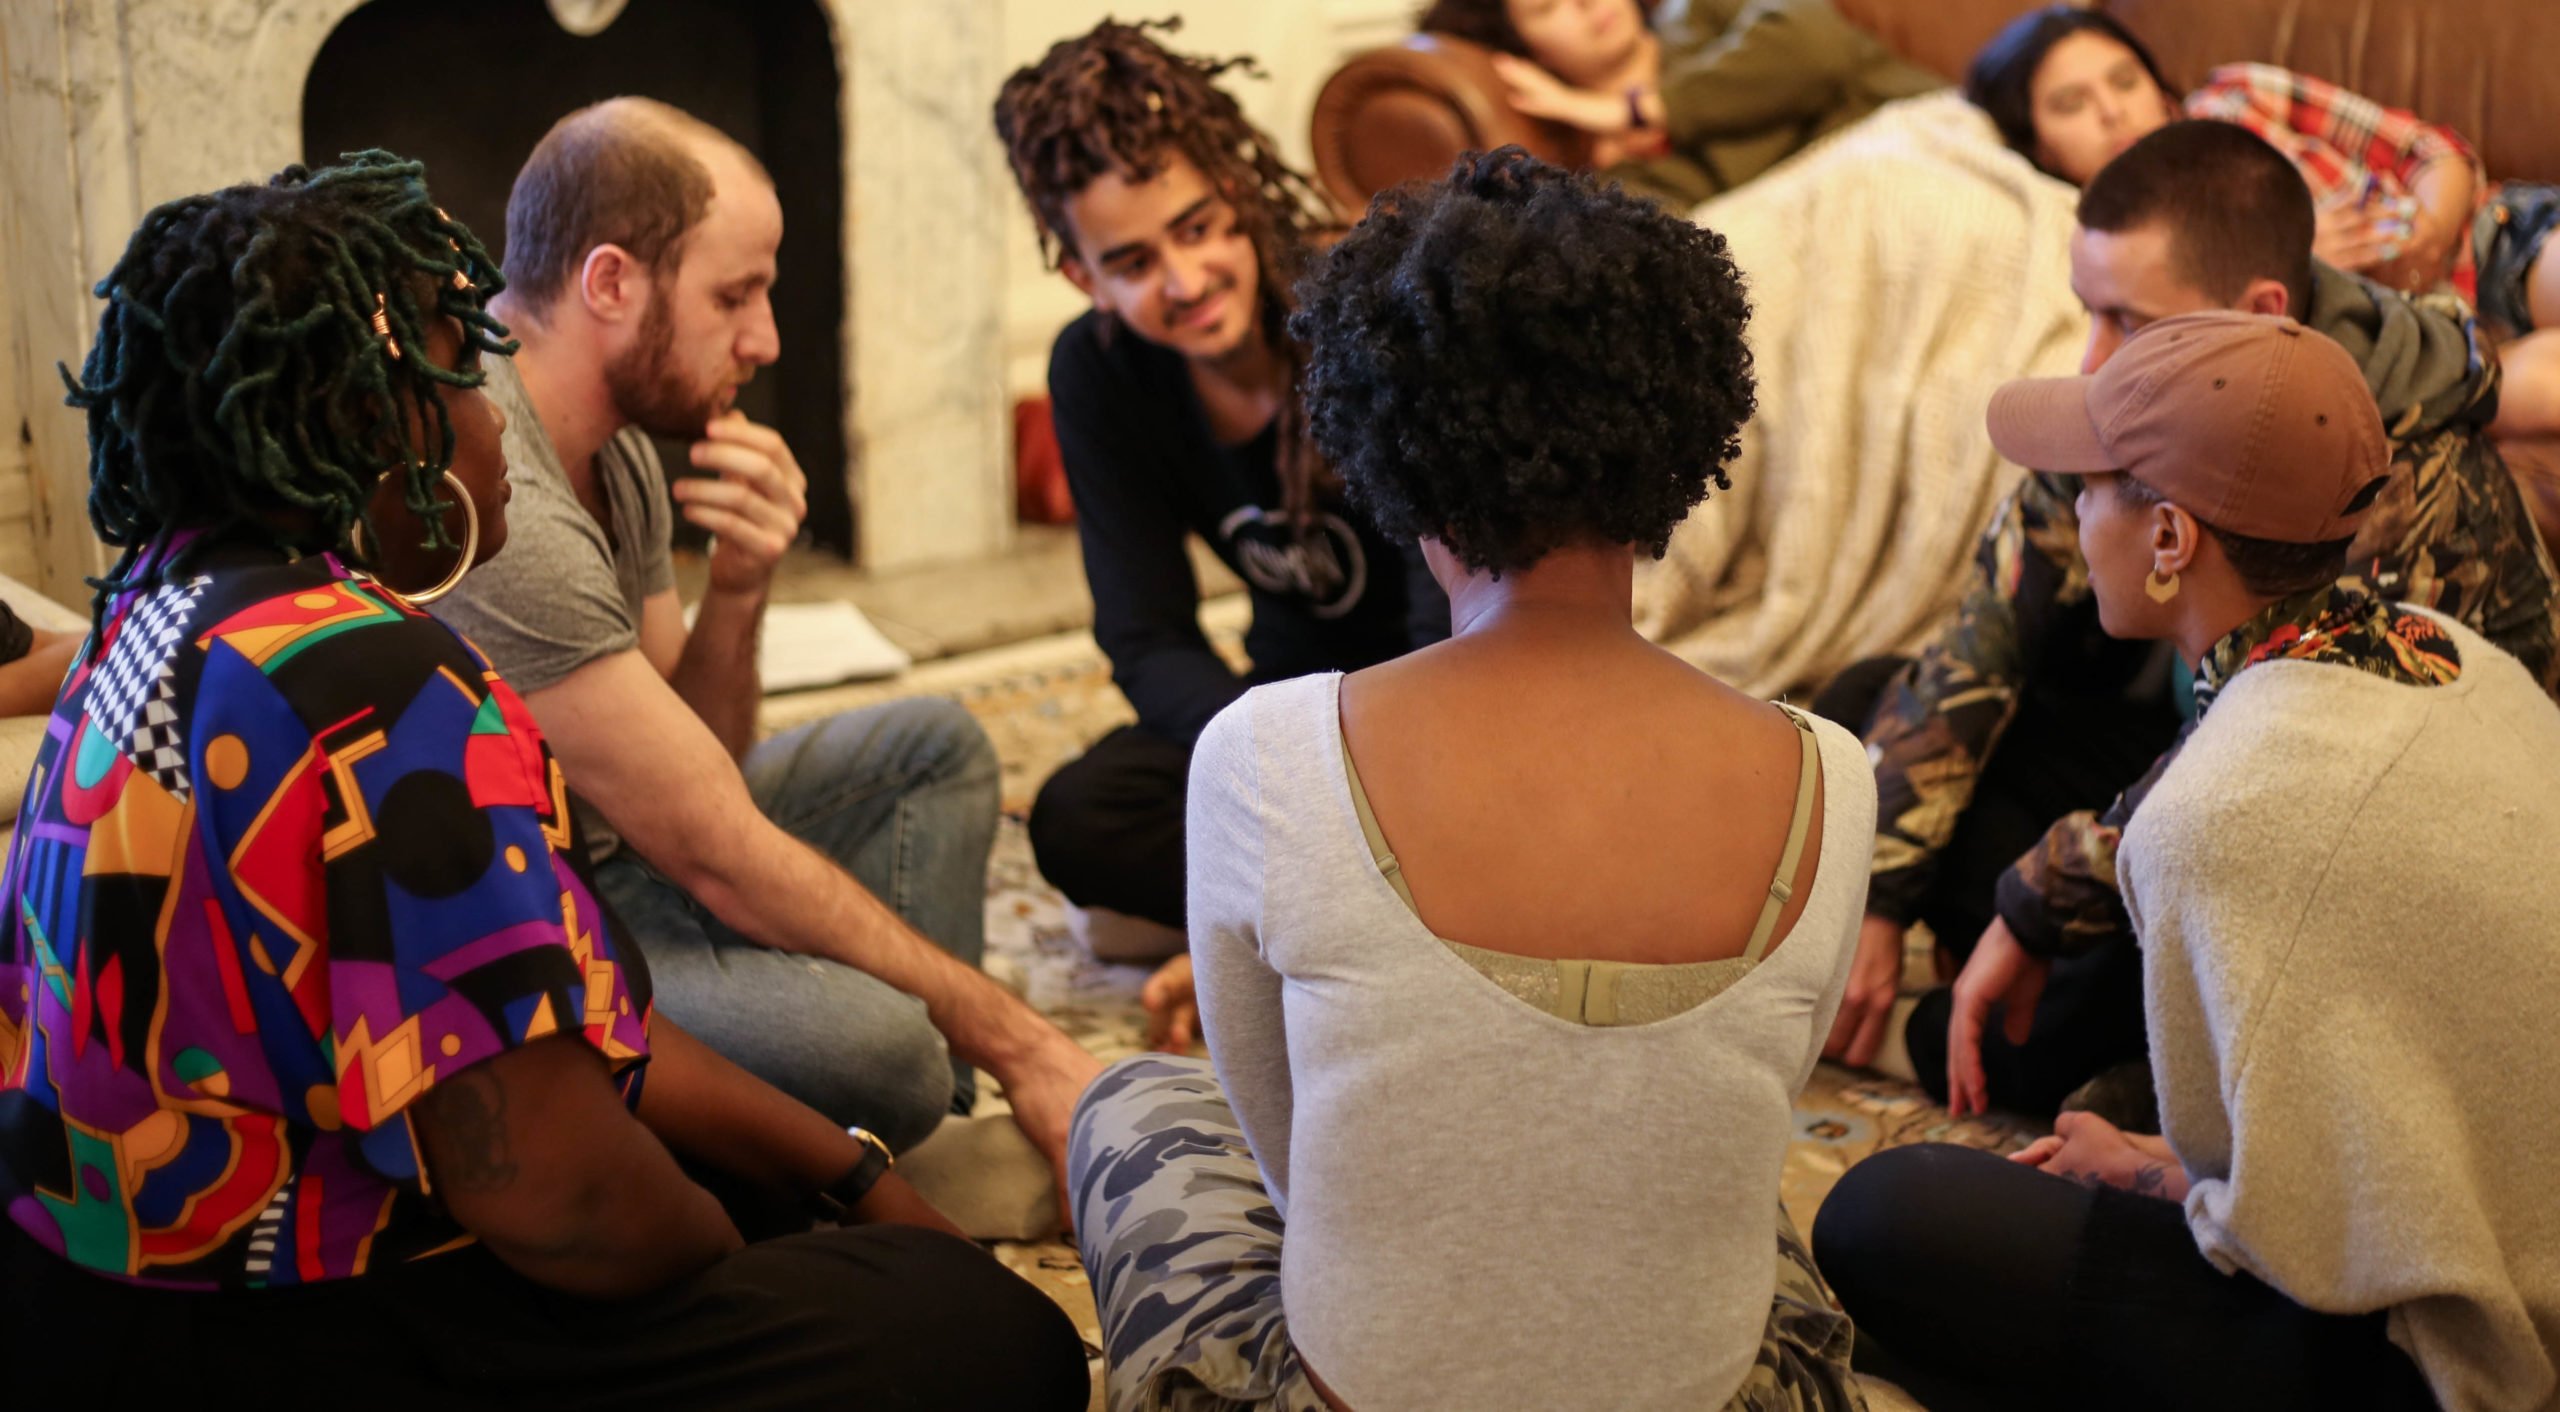 Multi-cultural group of young people sitting in a circle on the floor, leaning in and appearing to listen intently.